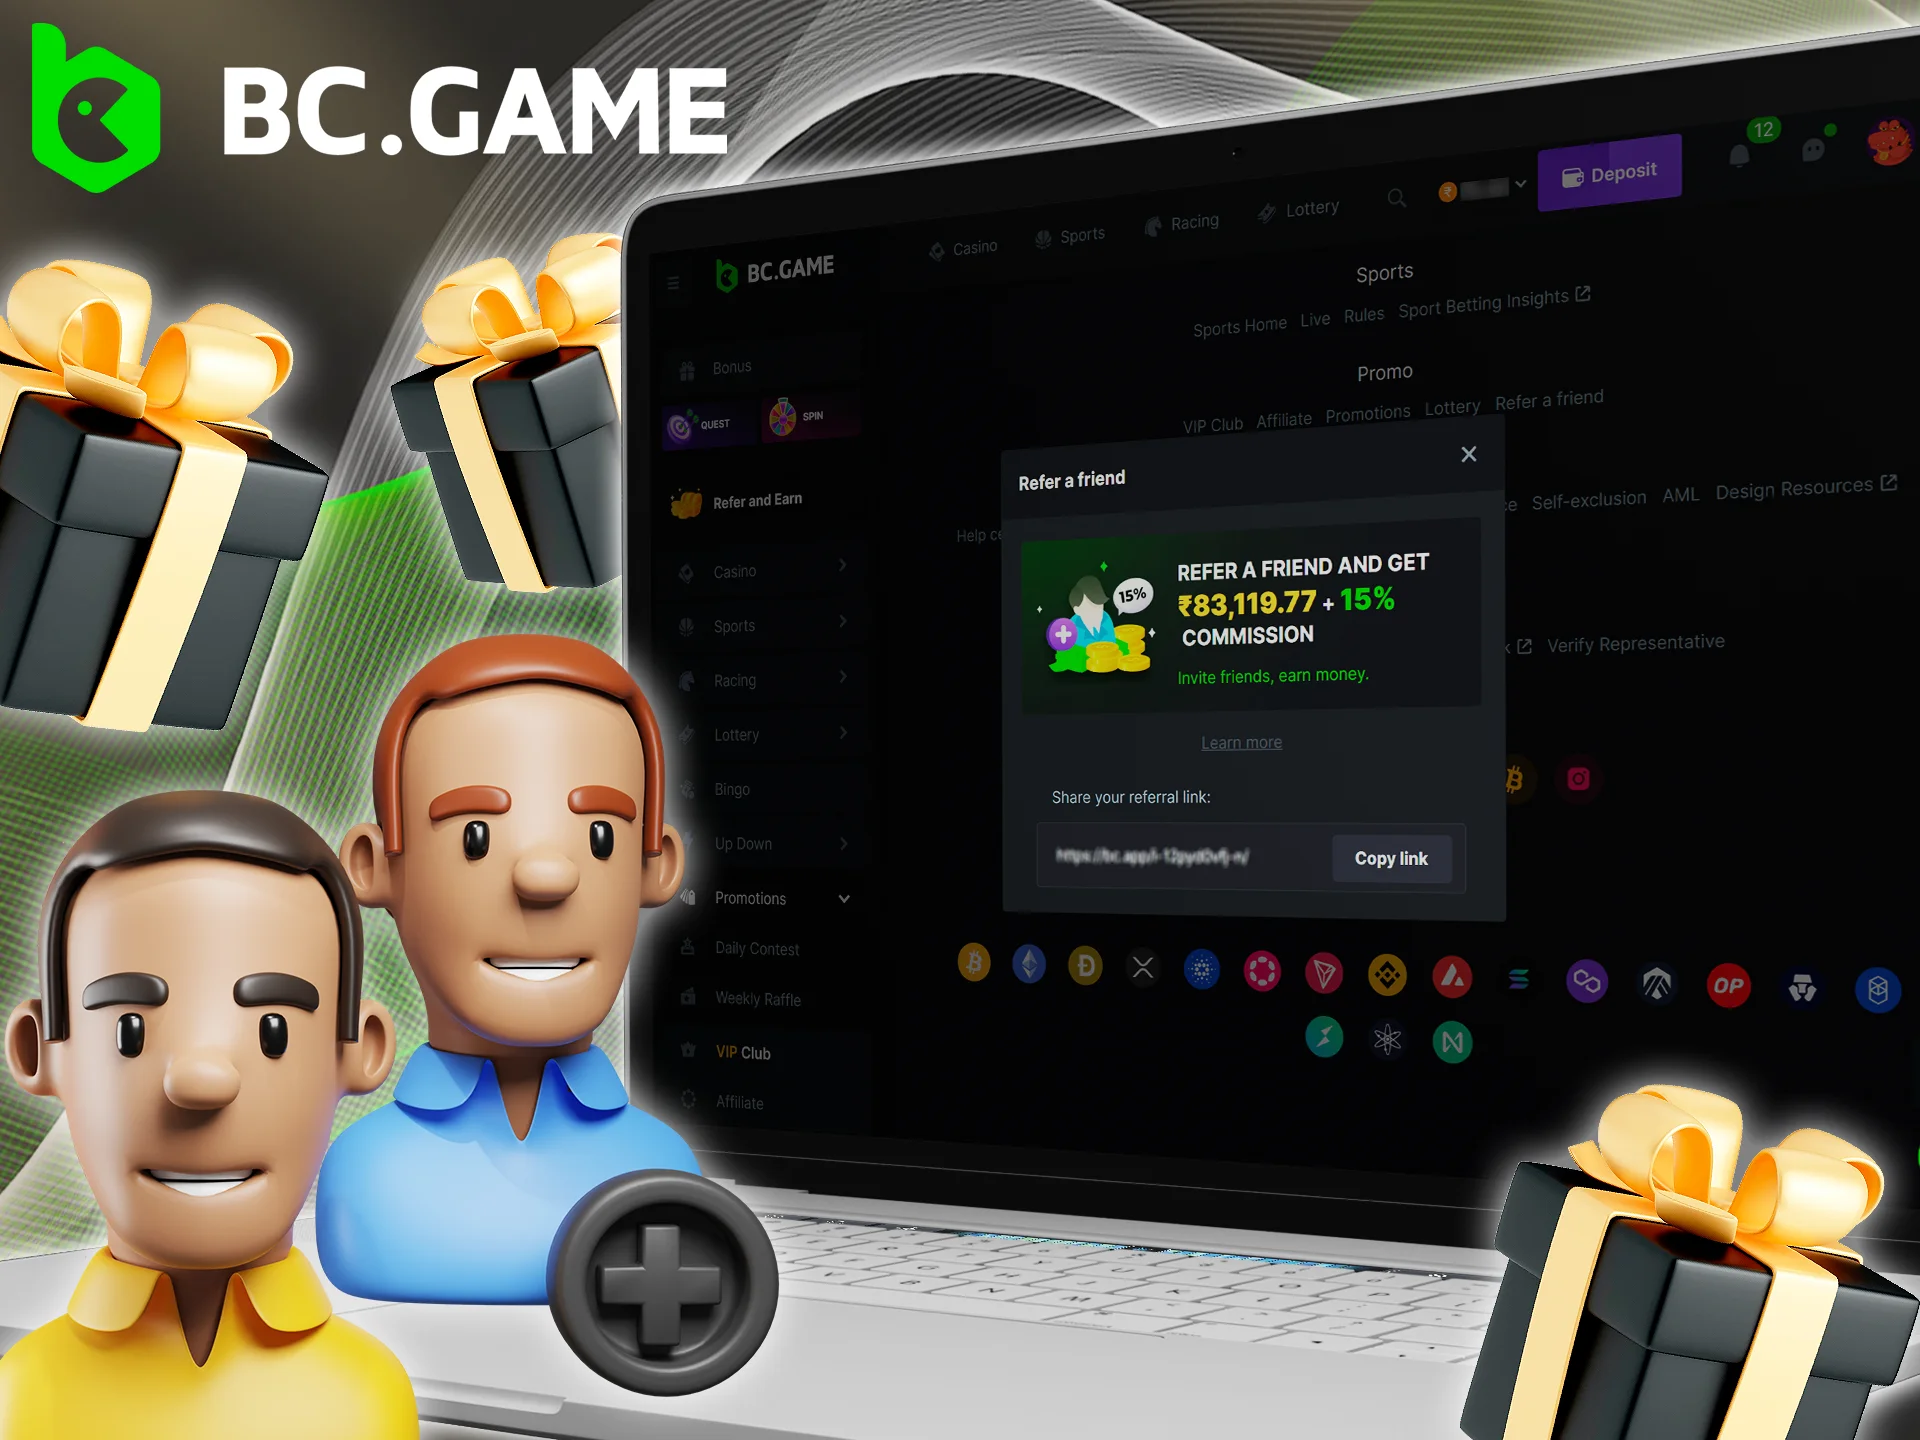 Invite your friends to join BC Game and enjoy the bonuses.